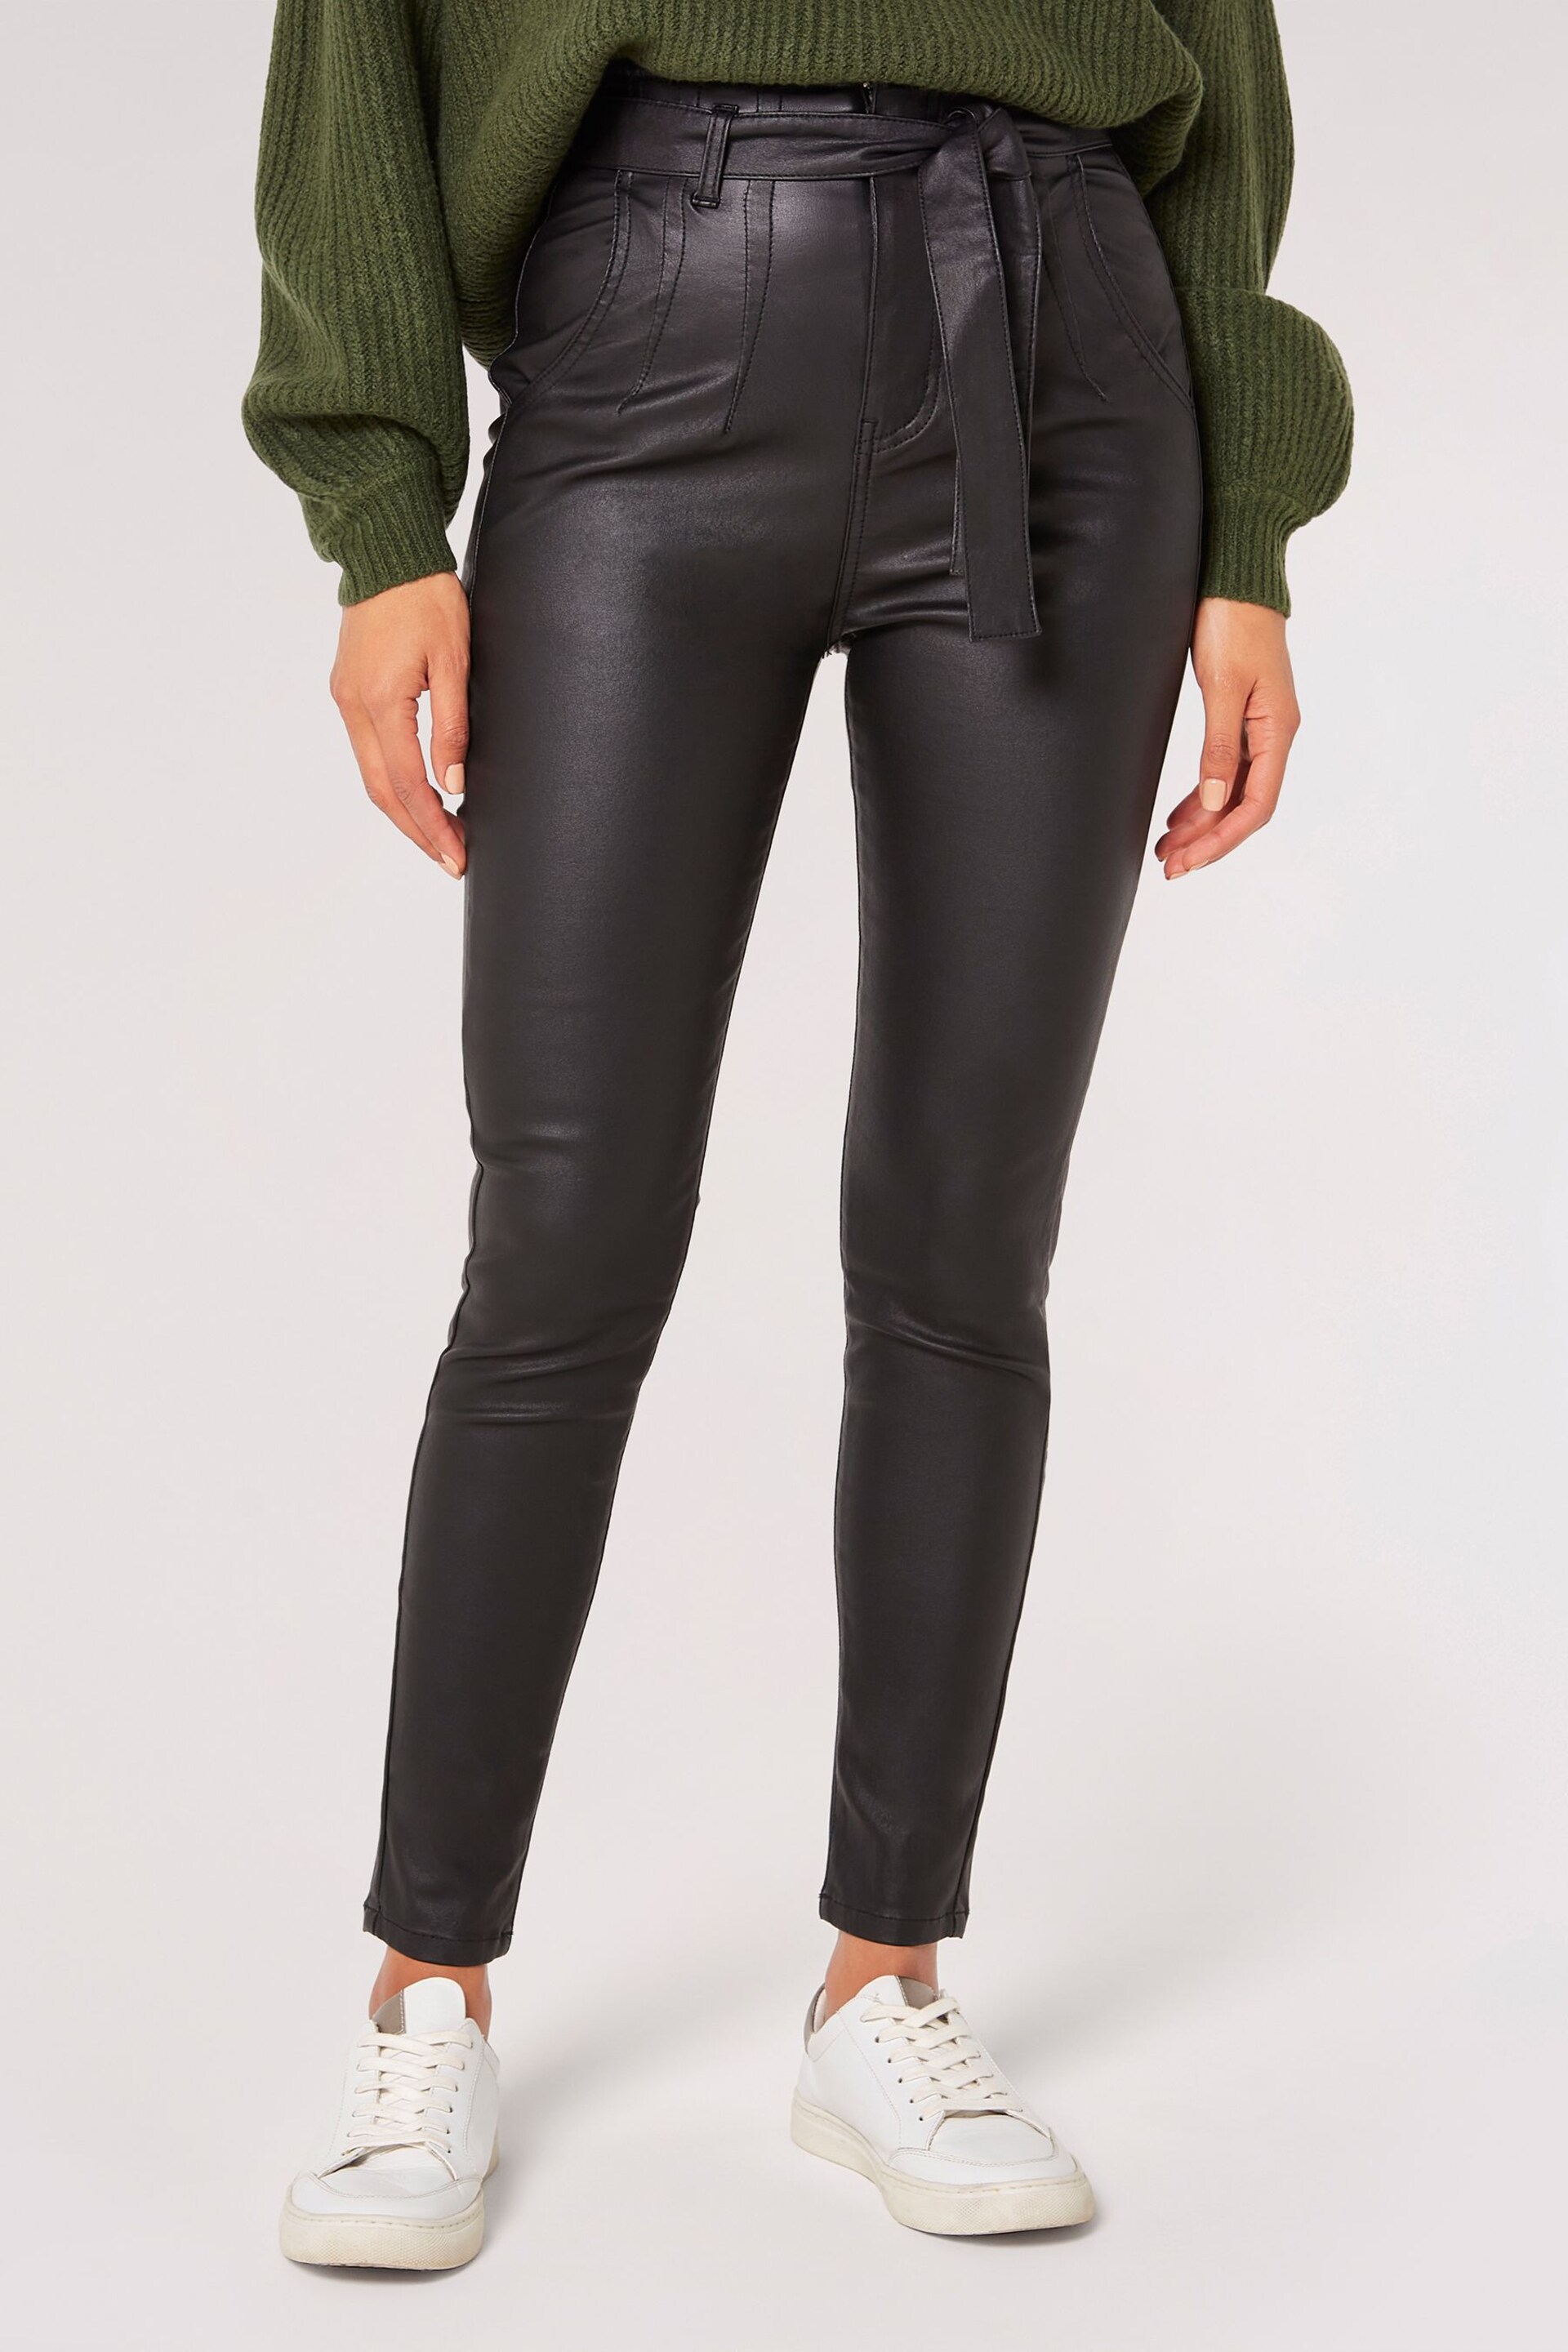 Apricot Black Leather Look Belted Trousers - Image 1 of 4